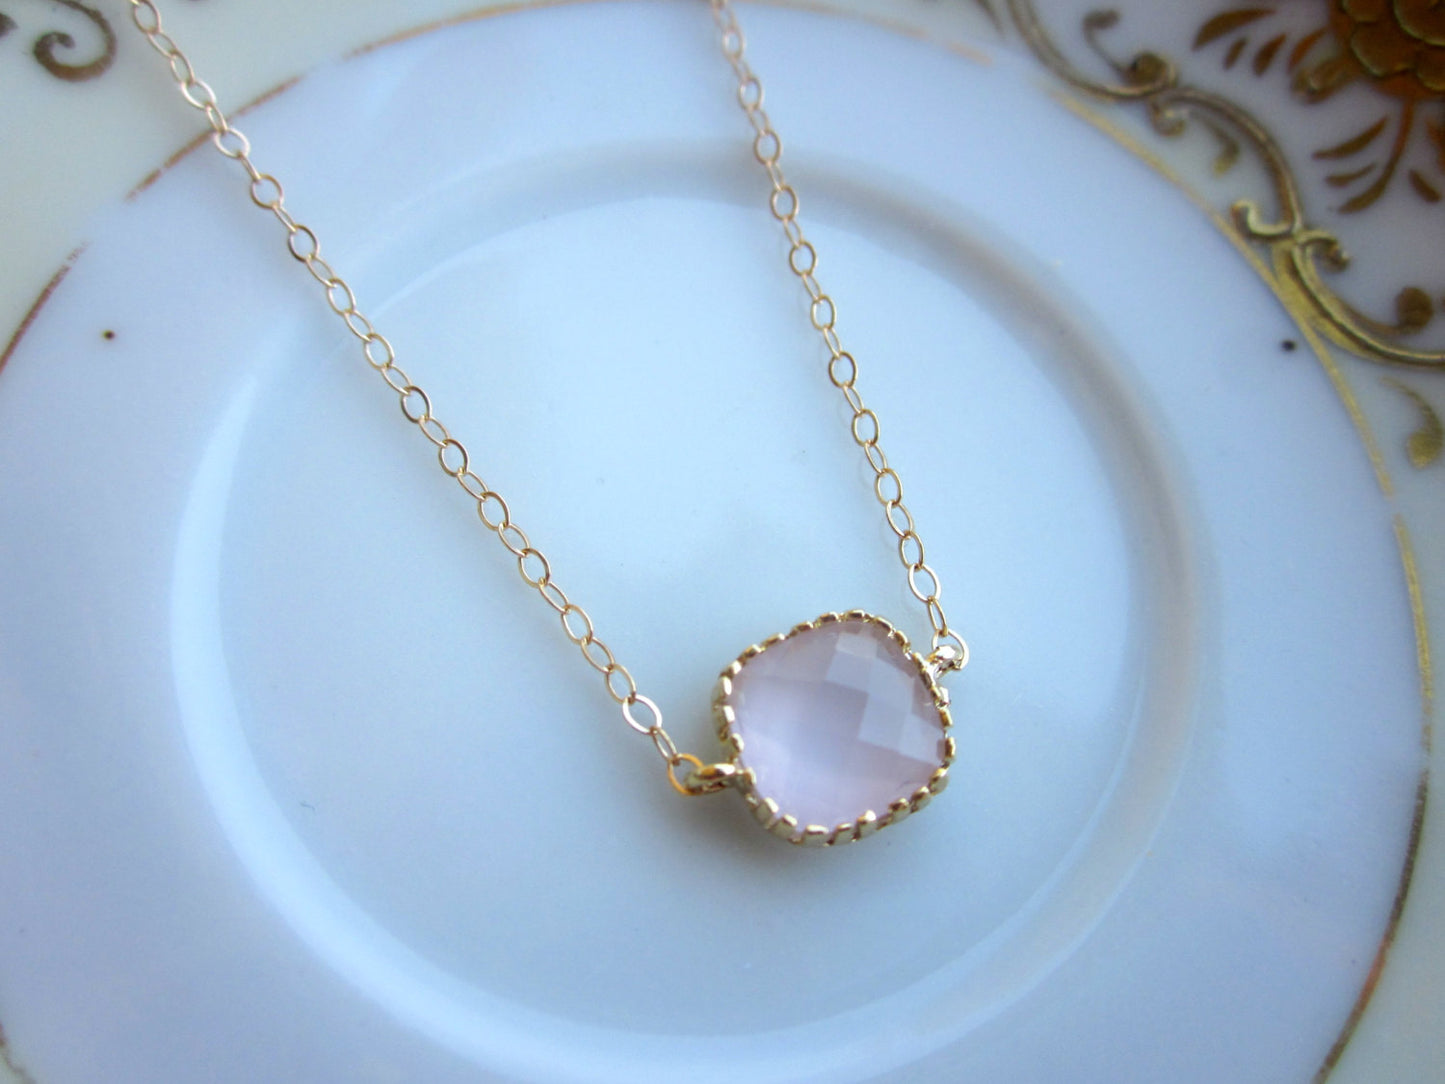 Dainty Opal Pink Necklace Gold Filled Chain - Bridesmaid Necklace - Wedding Jewelry - Valentines Day Gift - Gift under 25